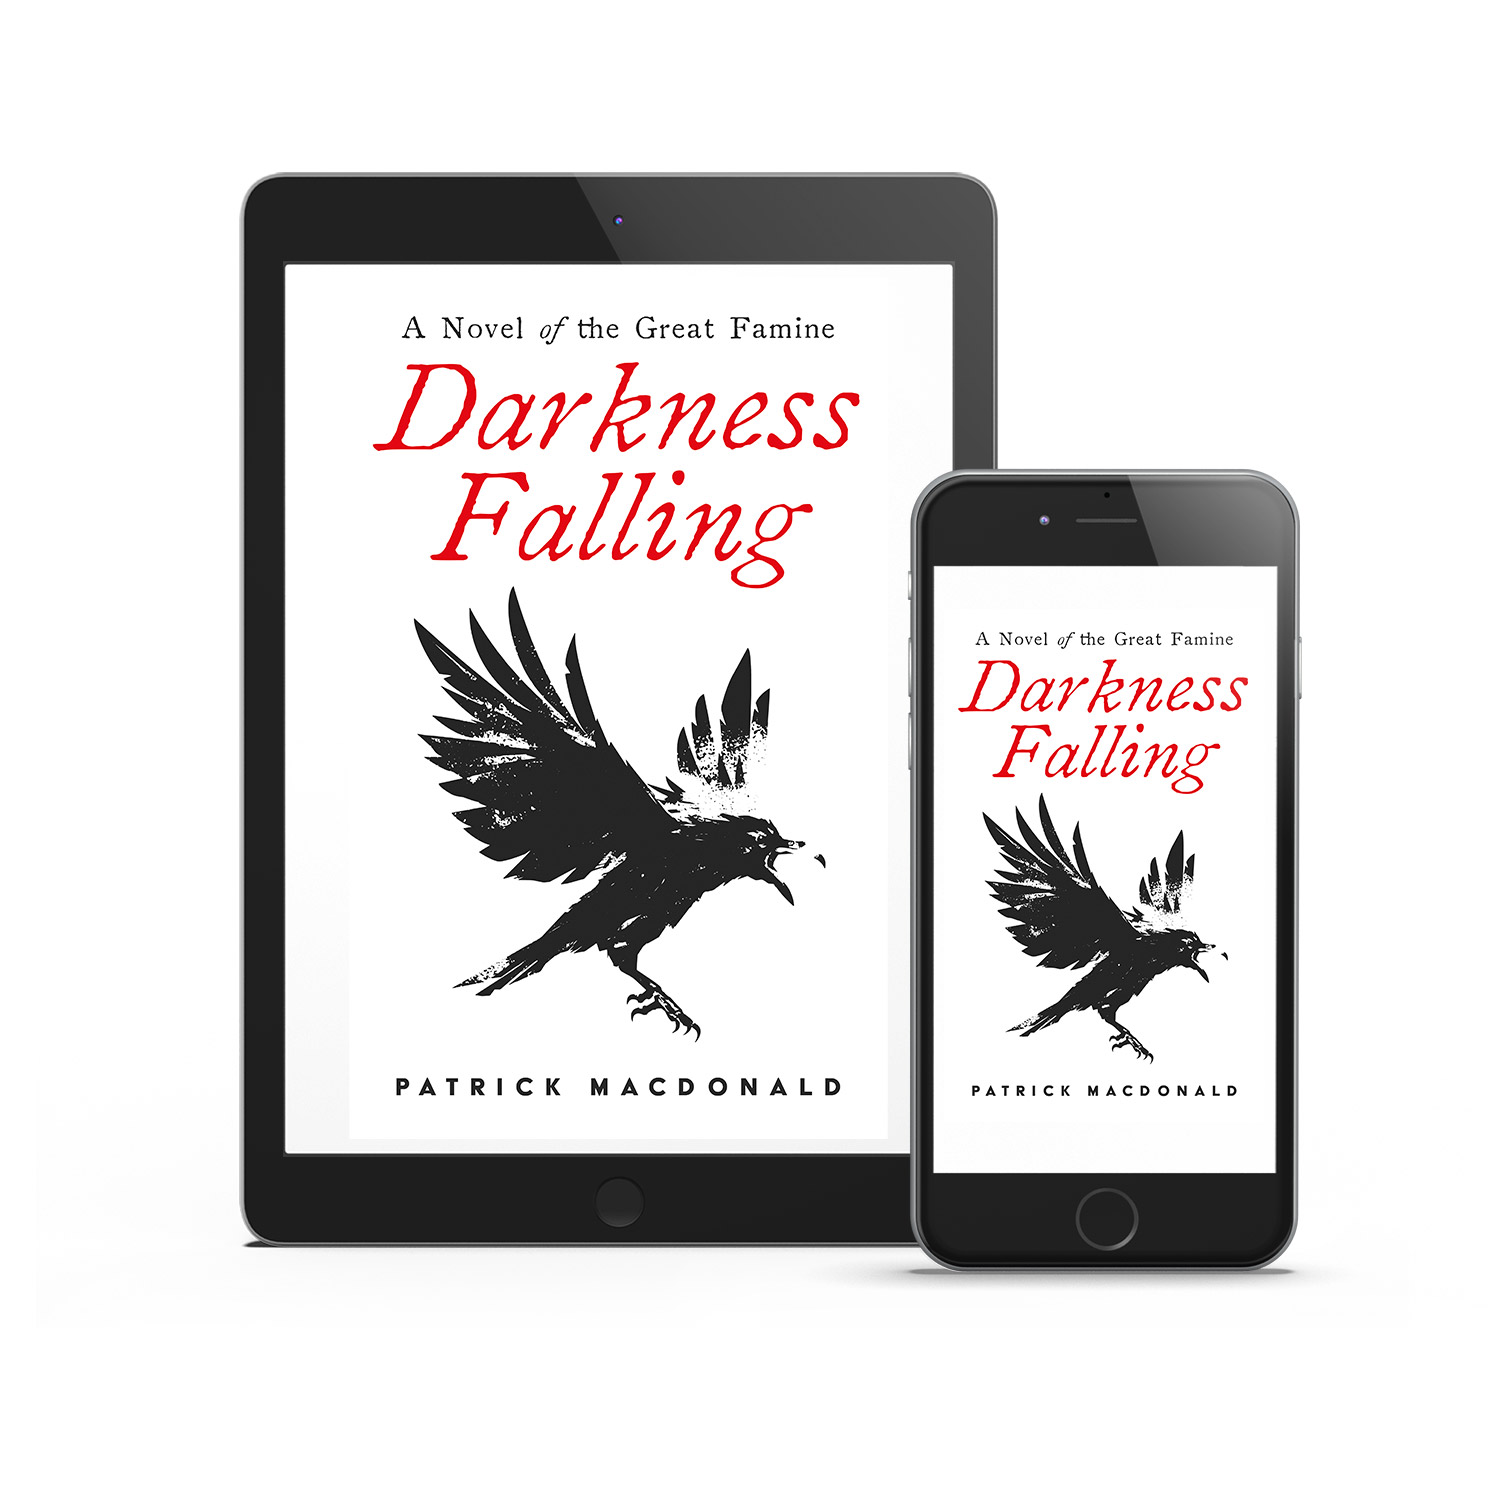 'Darkness Falling' is a sweeping historical novel, set during the Great Famine, in mid 19th Century Ireland. The author is Patrick MacDonald. The book cover design and interior formatting are by Mark Thomas. To learn more about what Mark could do for your book, please visit coverness.com.